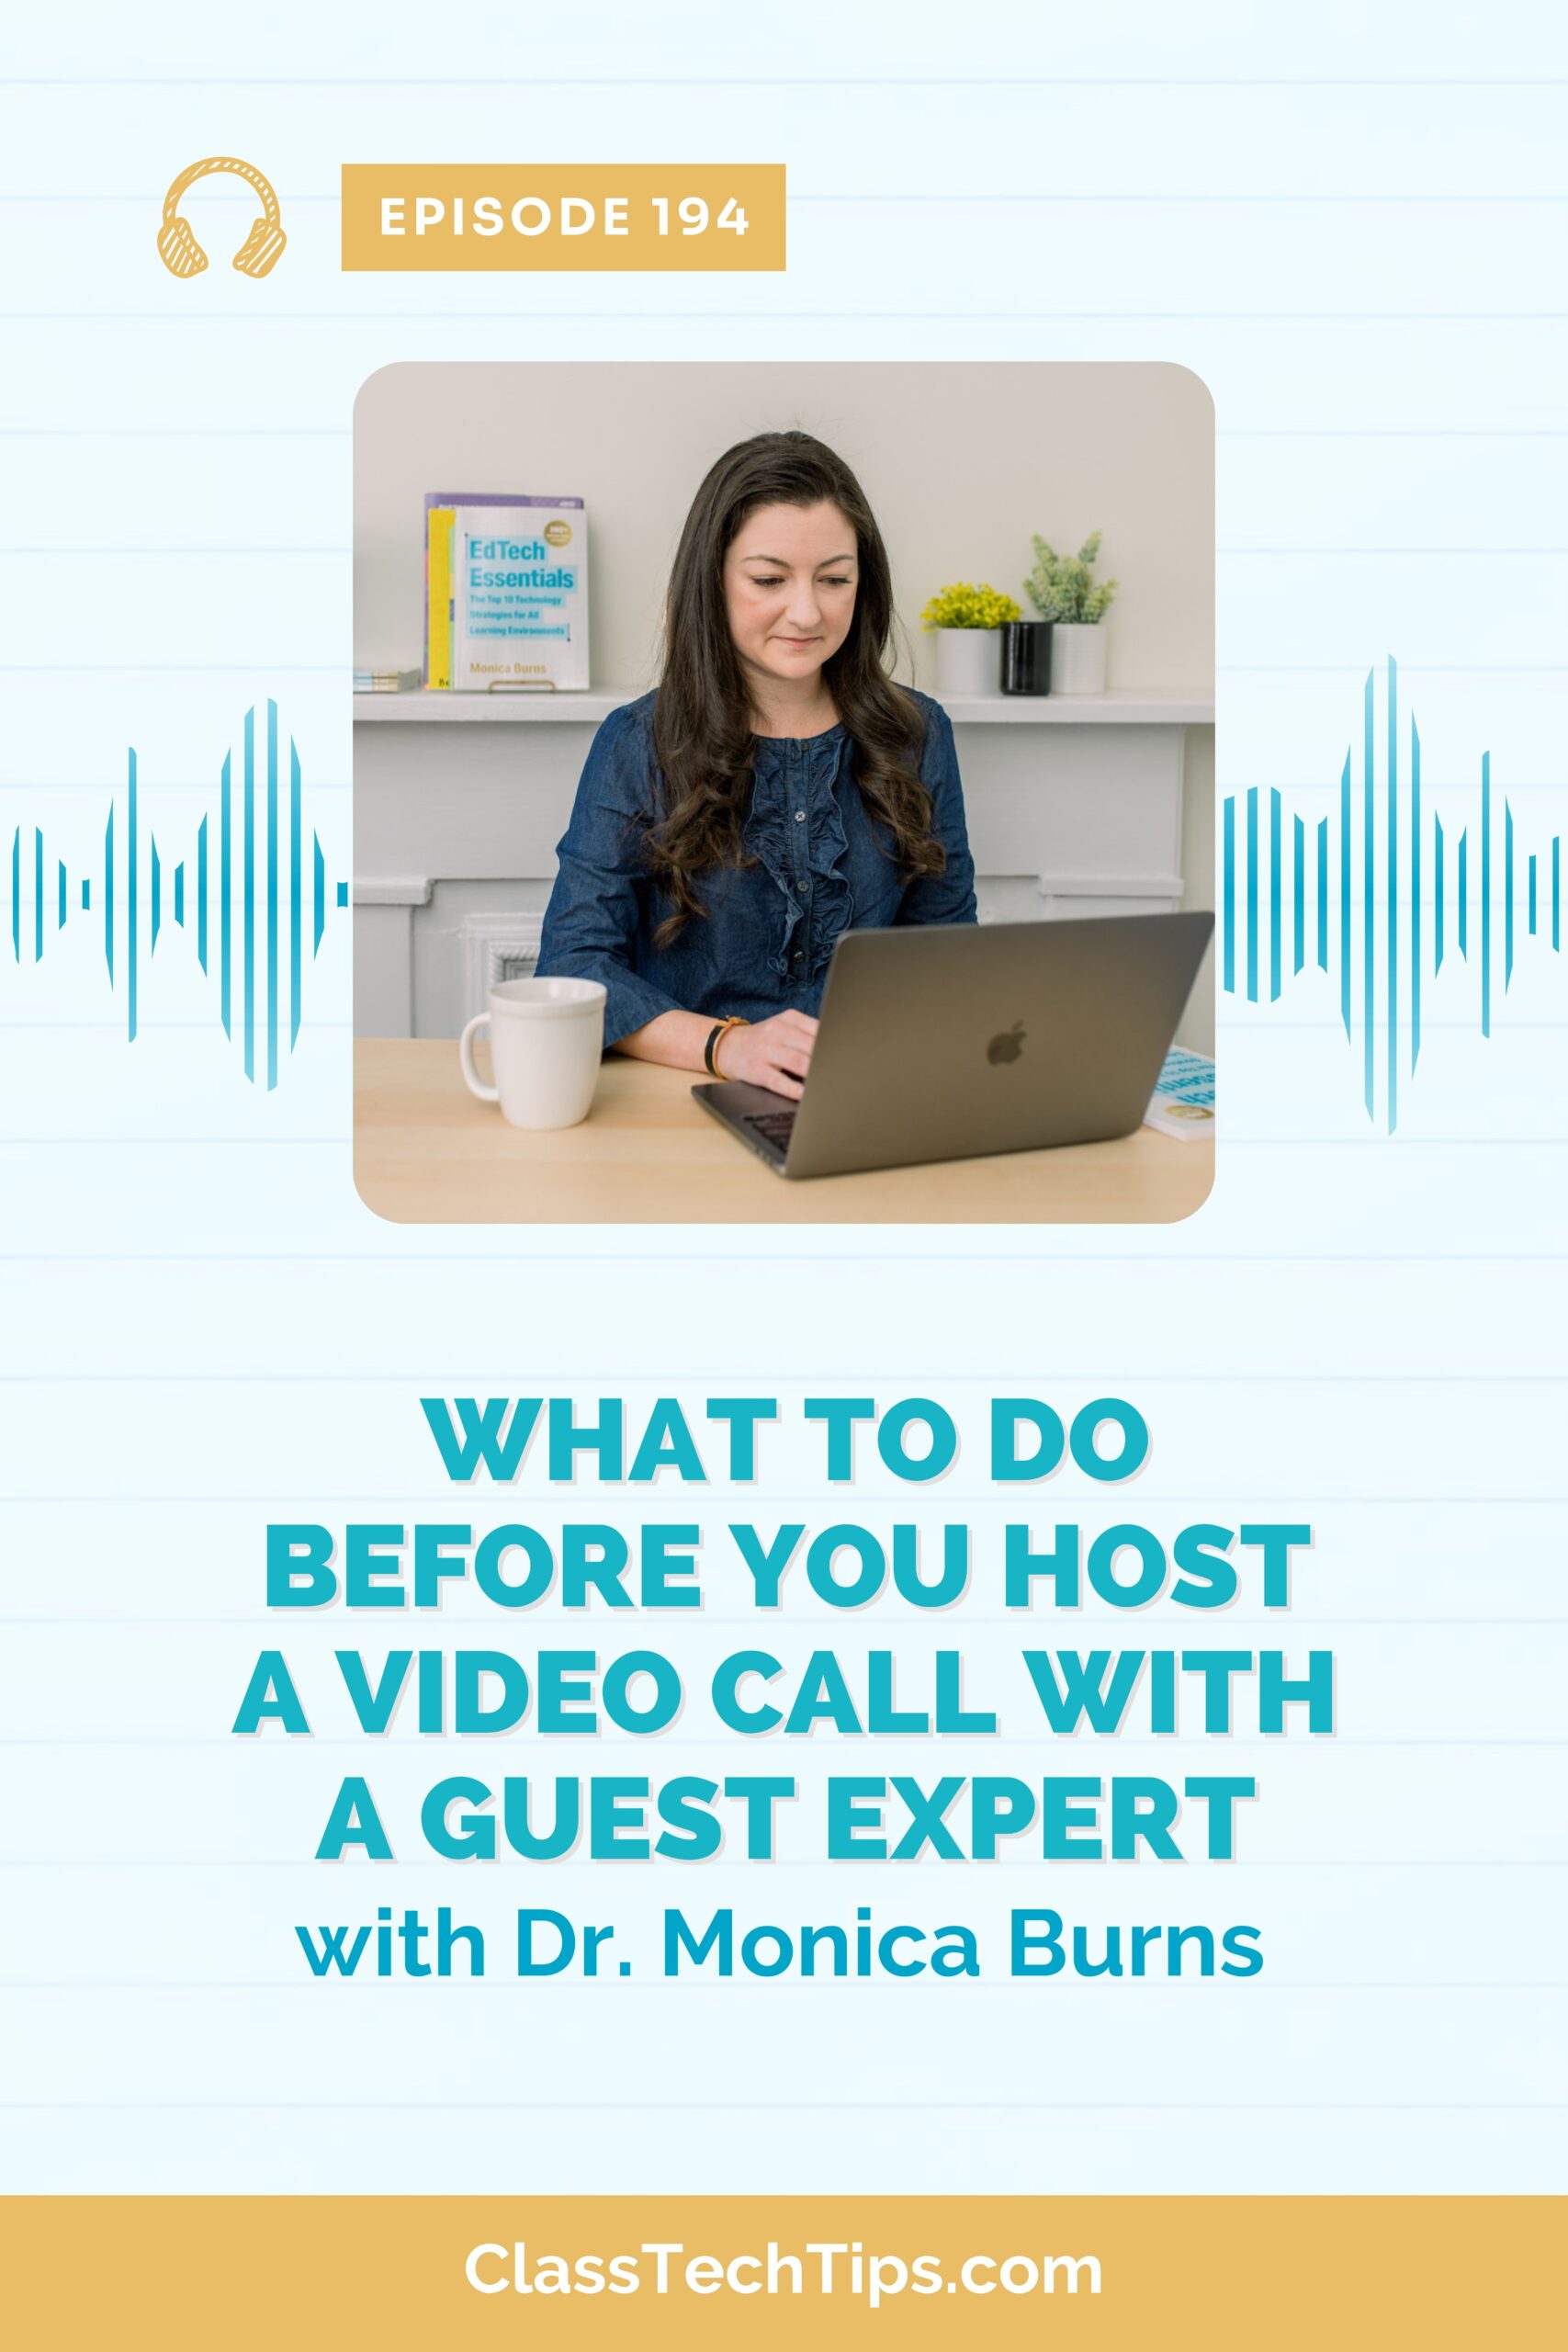 What To Do Before You Host a Video Call With a Guest Expert